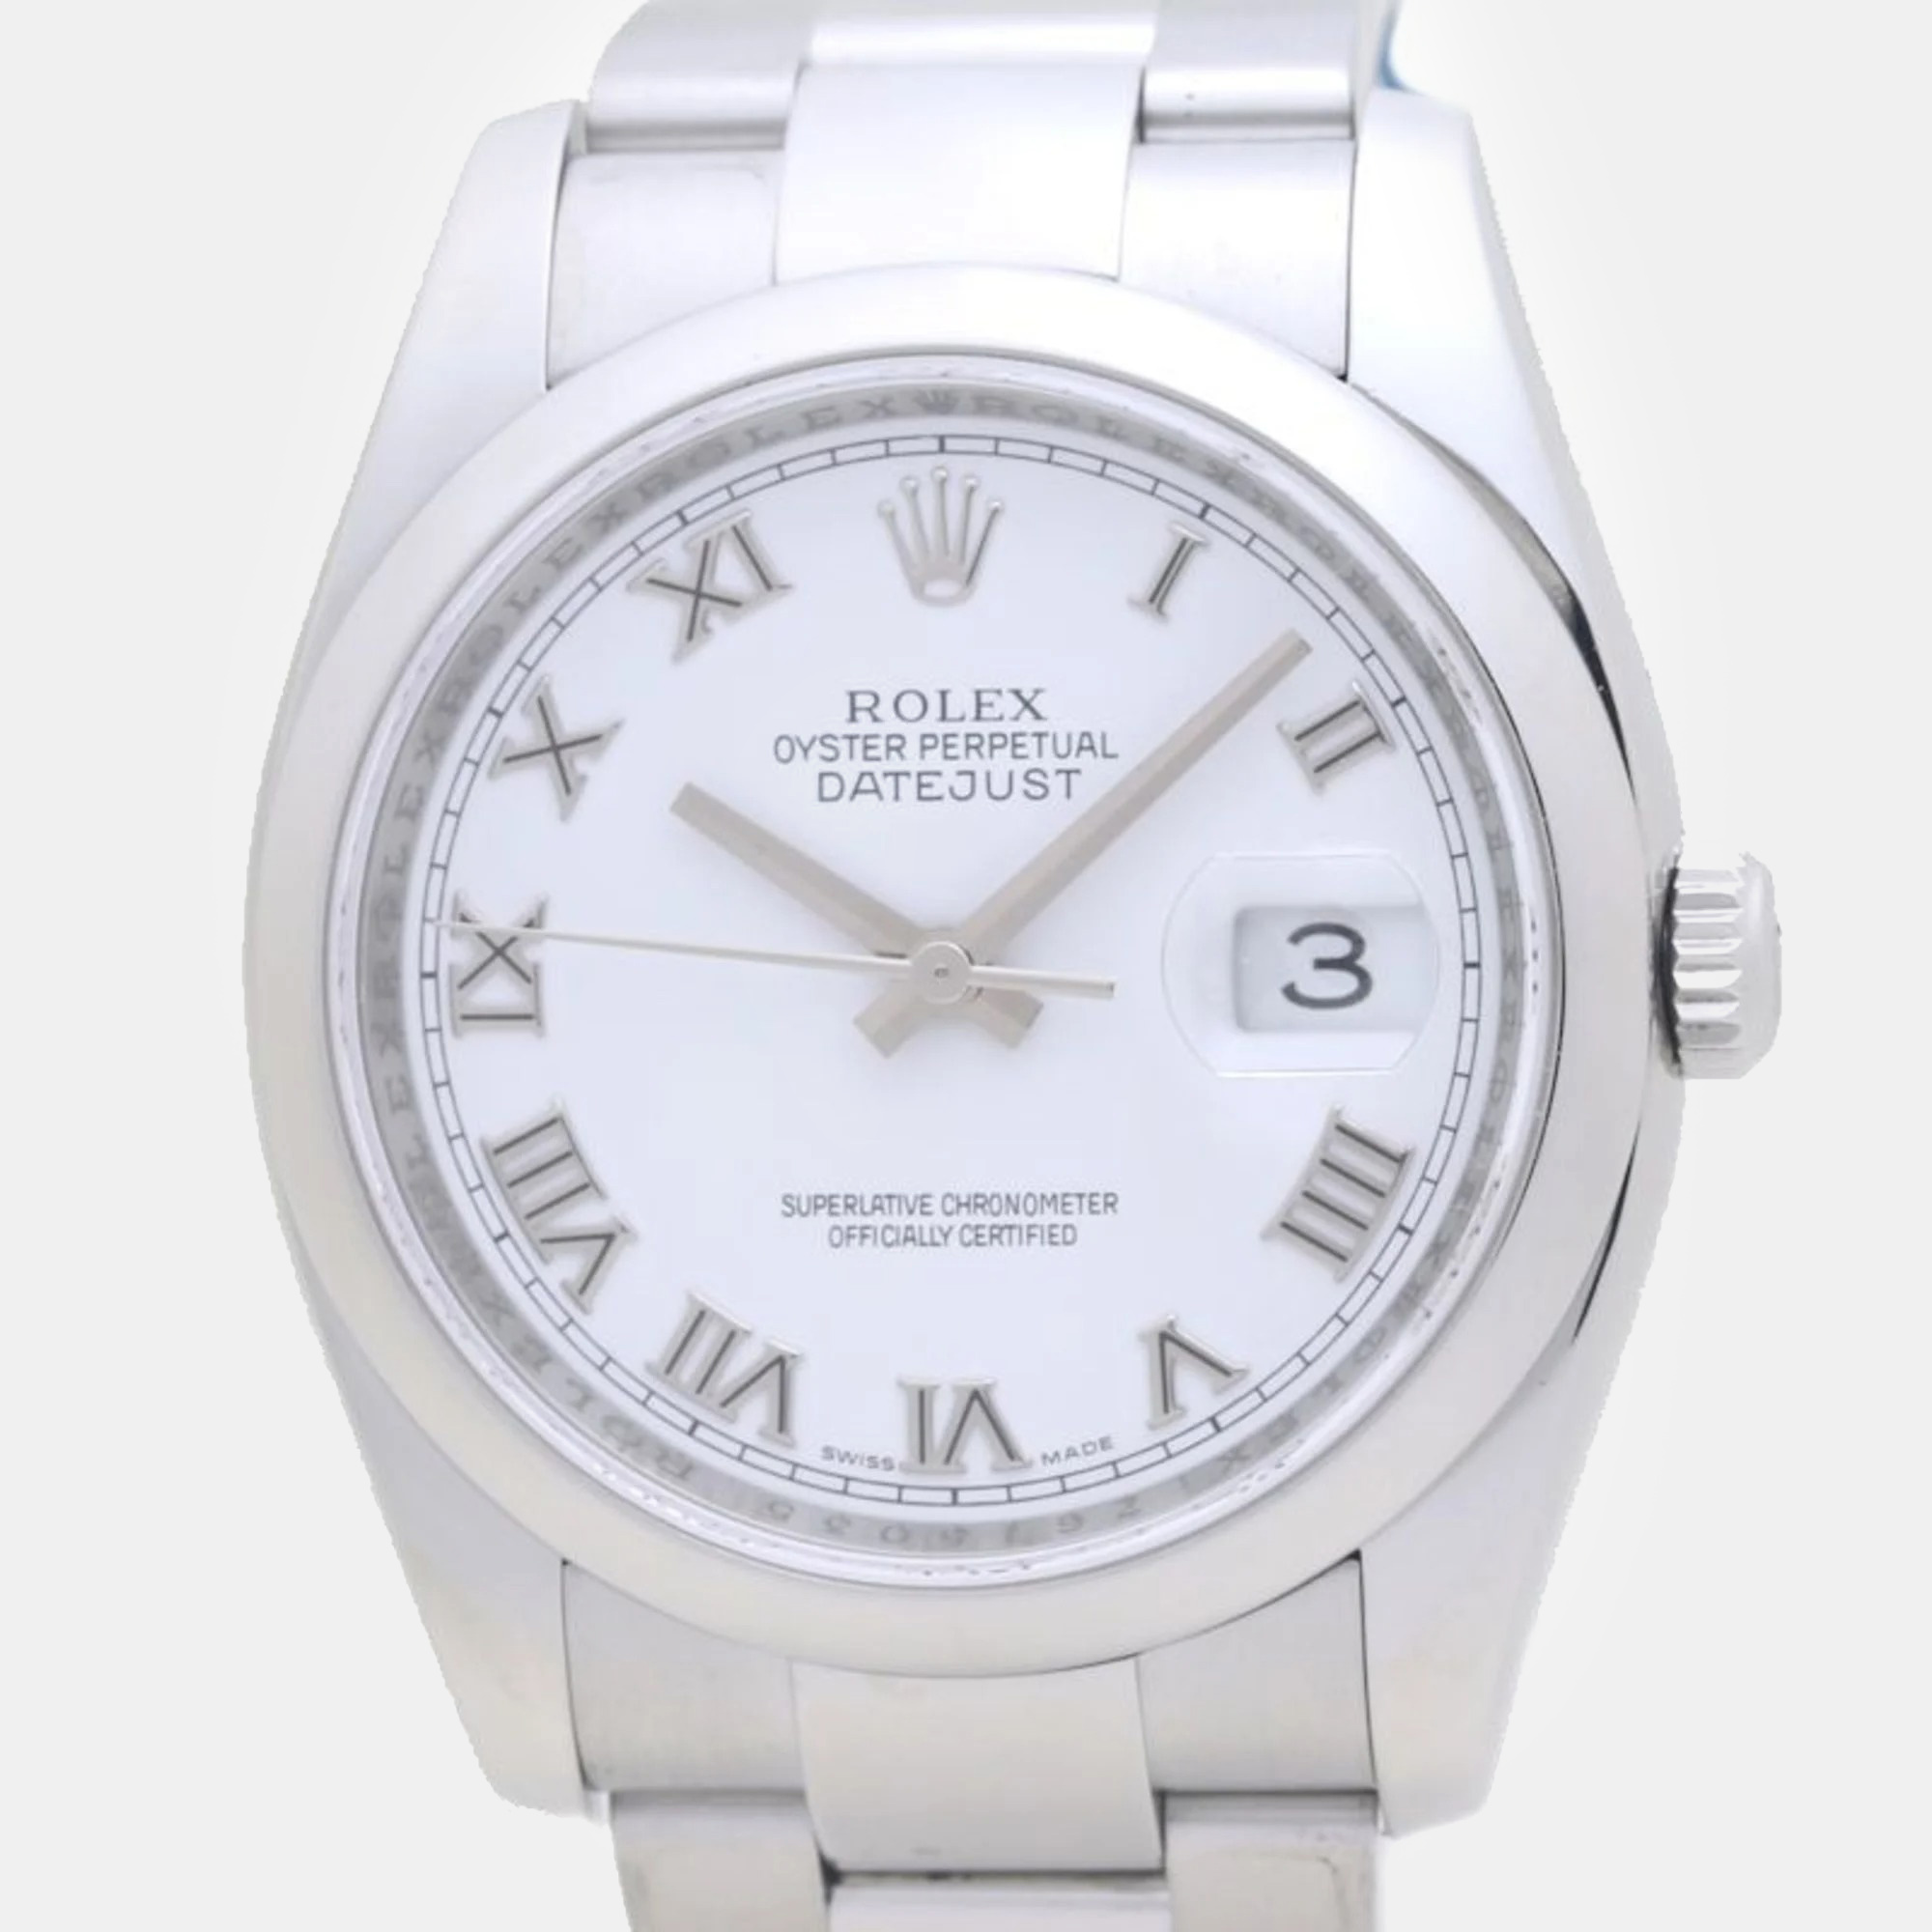 Rolex white stainless steel datejust 116200 automatic men's wristwatch 36 mm